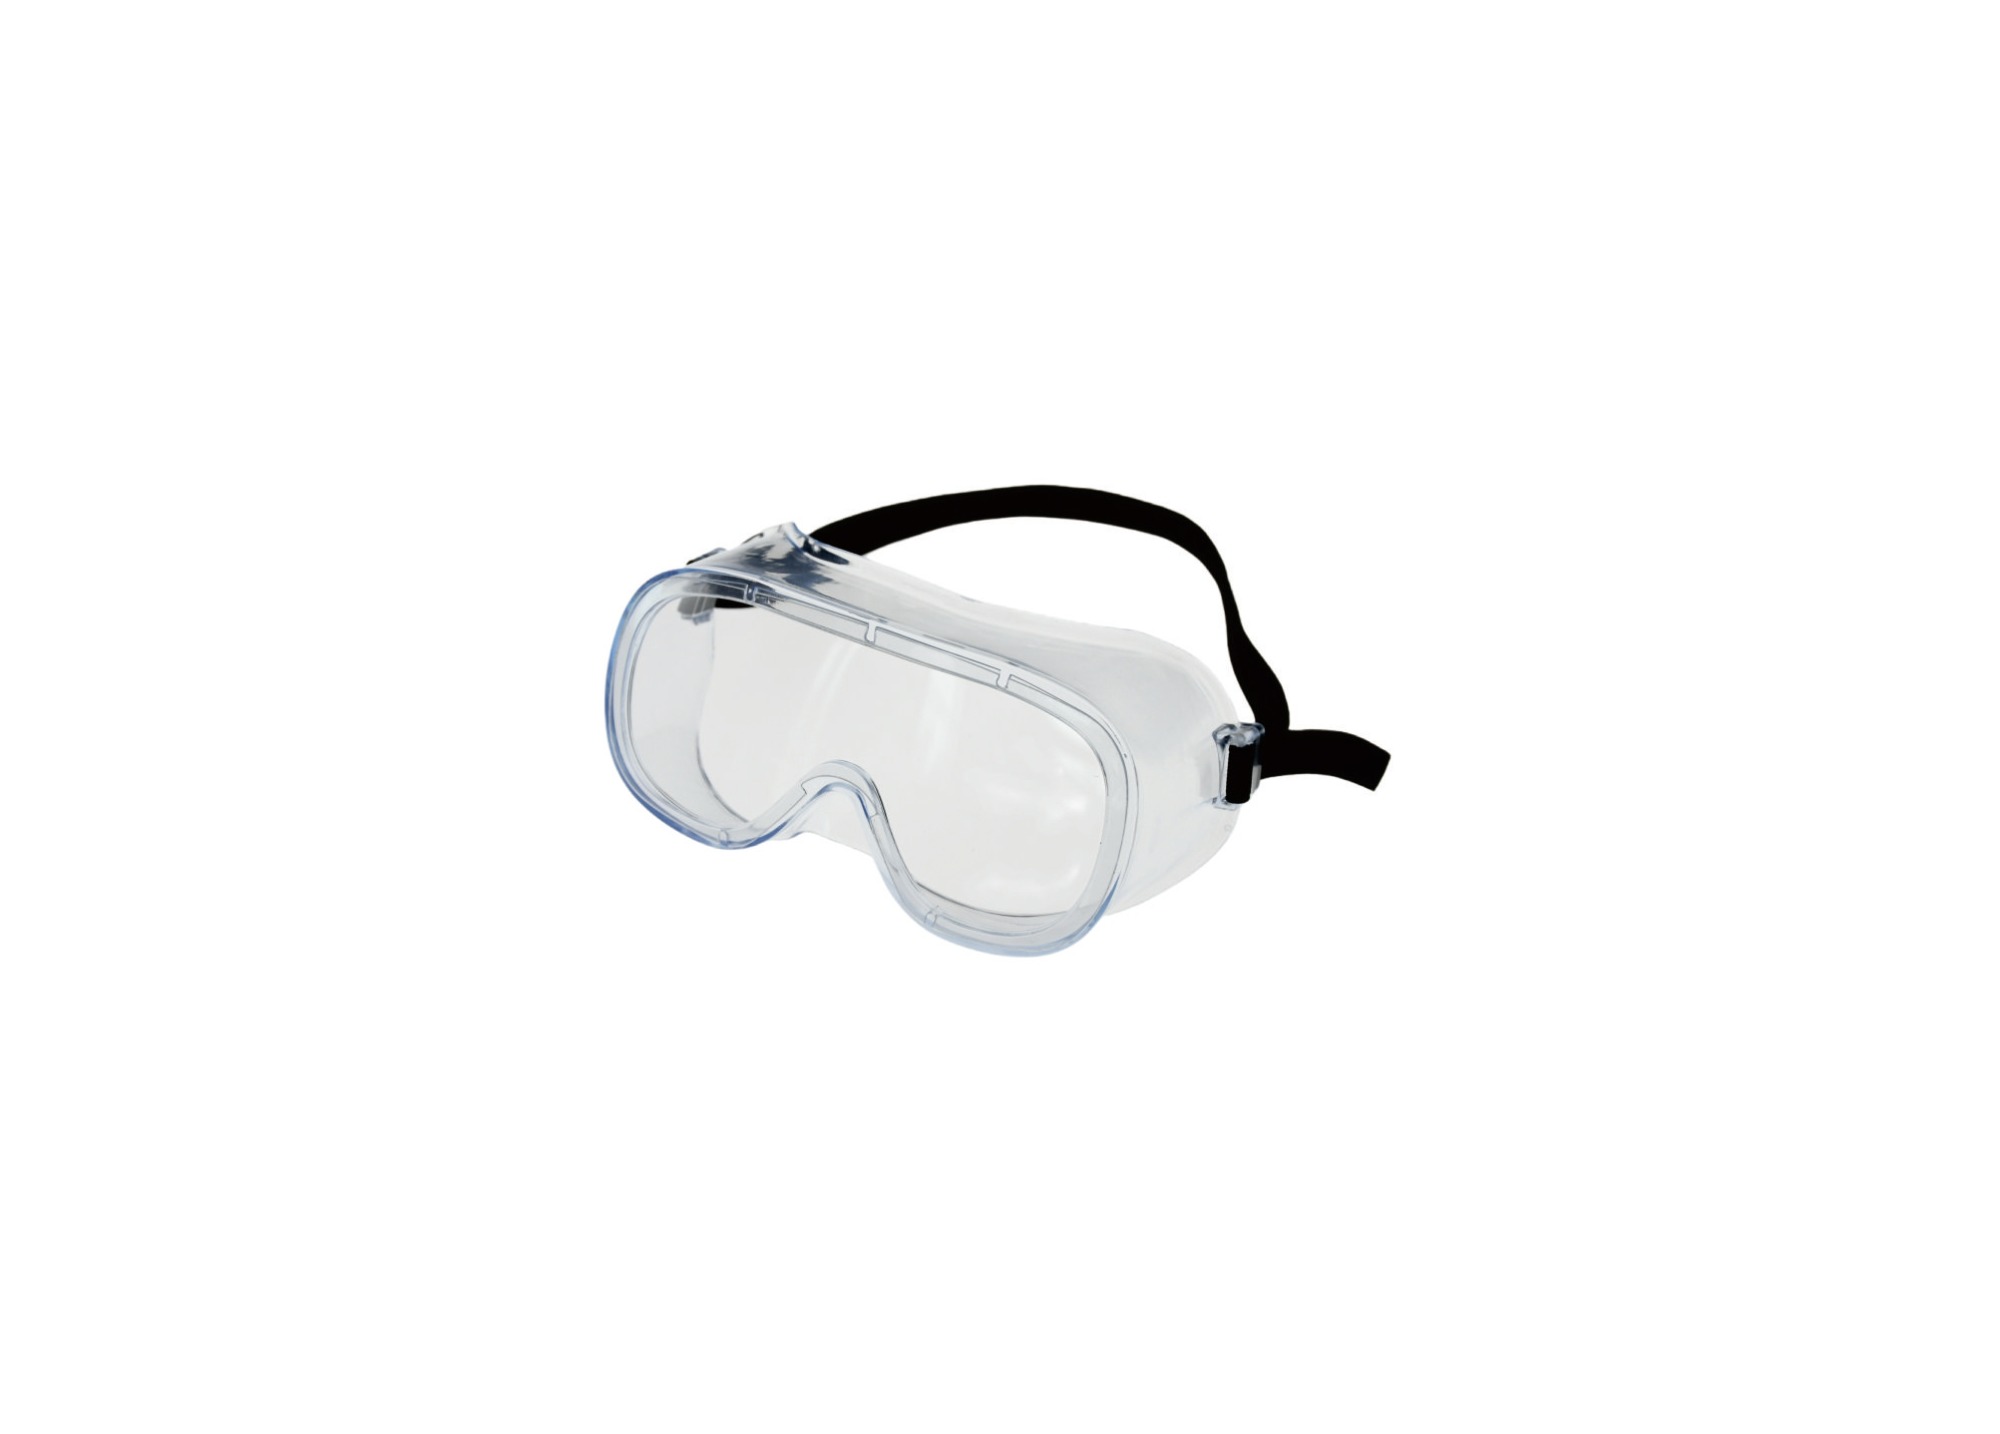 Medical disposable eye mask with fully sealing